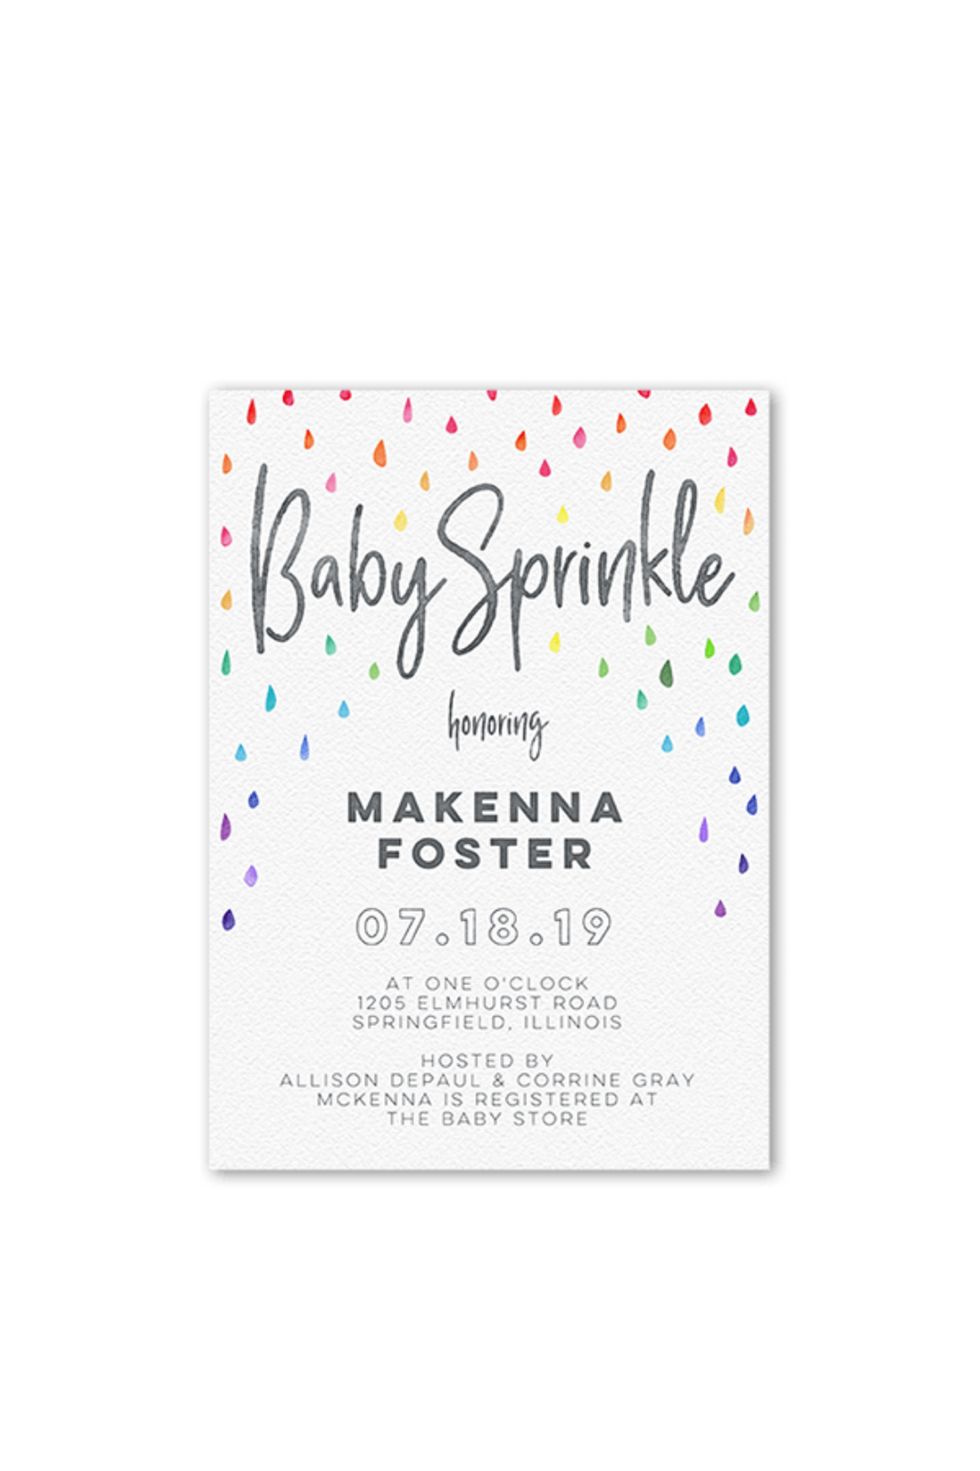 Berry Sweet Baby Shower Invitation Template Shower, Sprinkle or